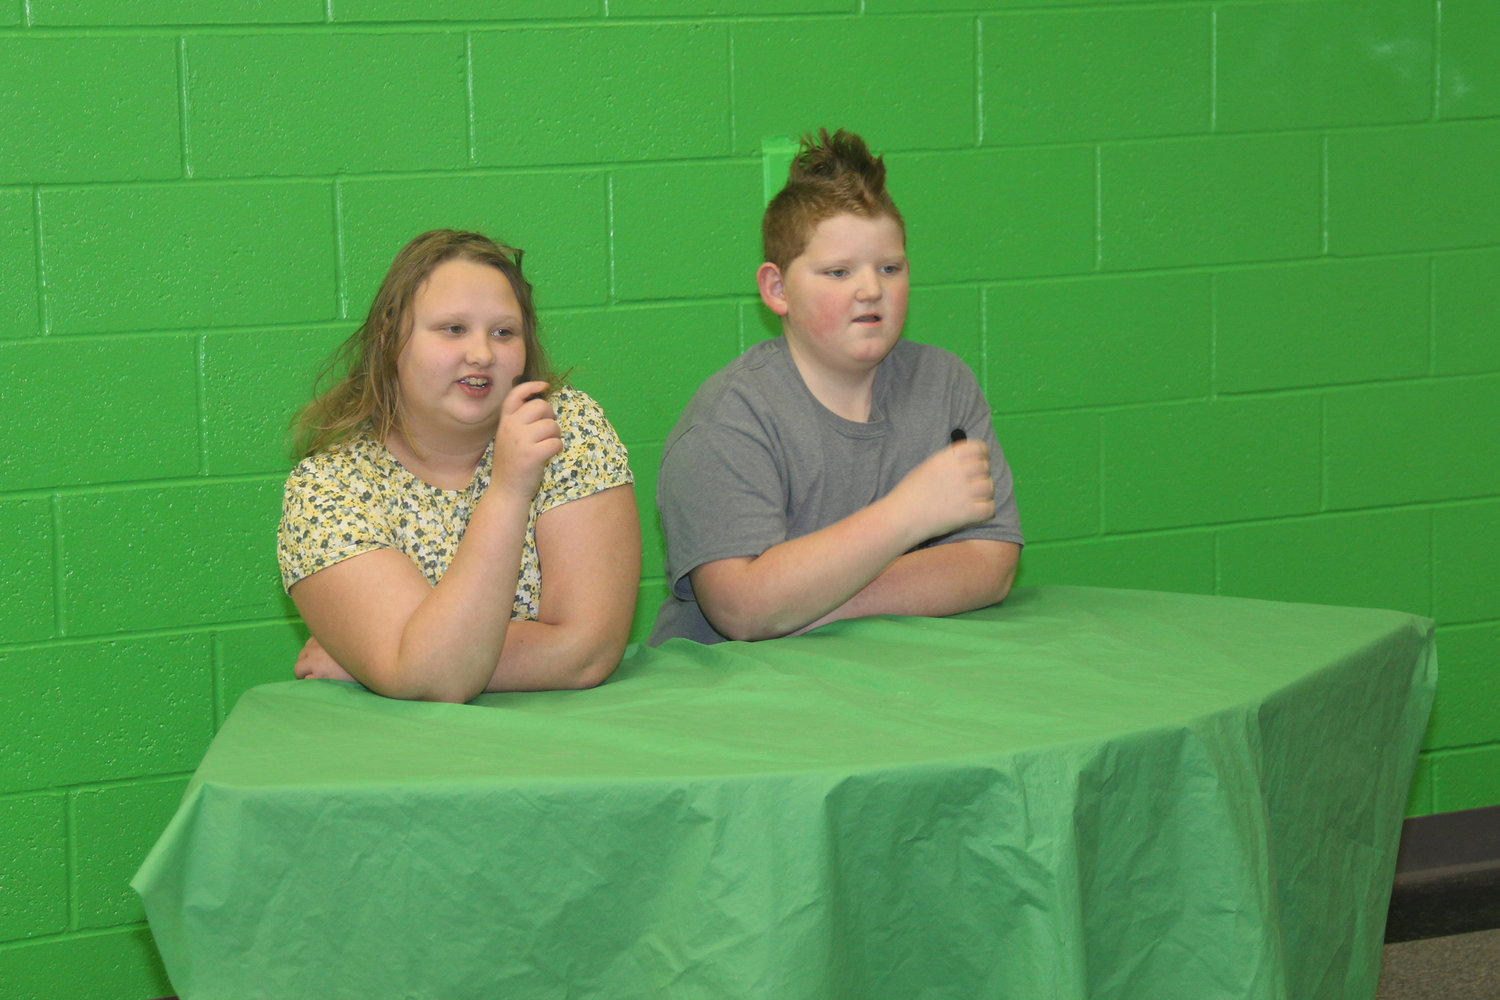 SCHOOL NEWS — Fifth graders Jolenne Barnes and Sam Williams serve as anchors for recorded news announcements at Rebecca Boone Elementary. Other students provide their scripts and add backgrounds to their green screen environment through video editing.